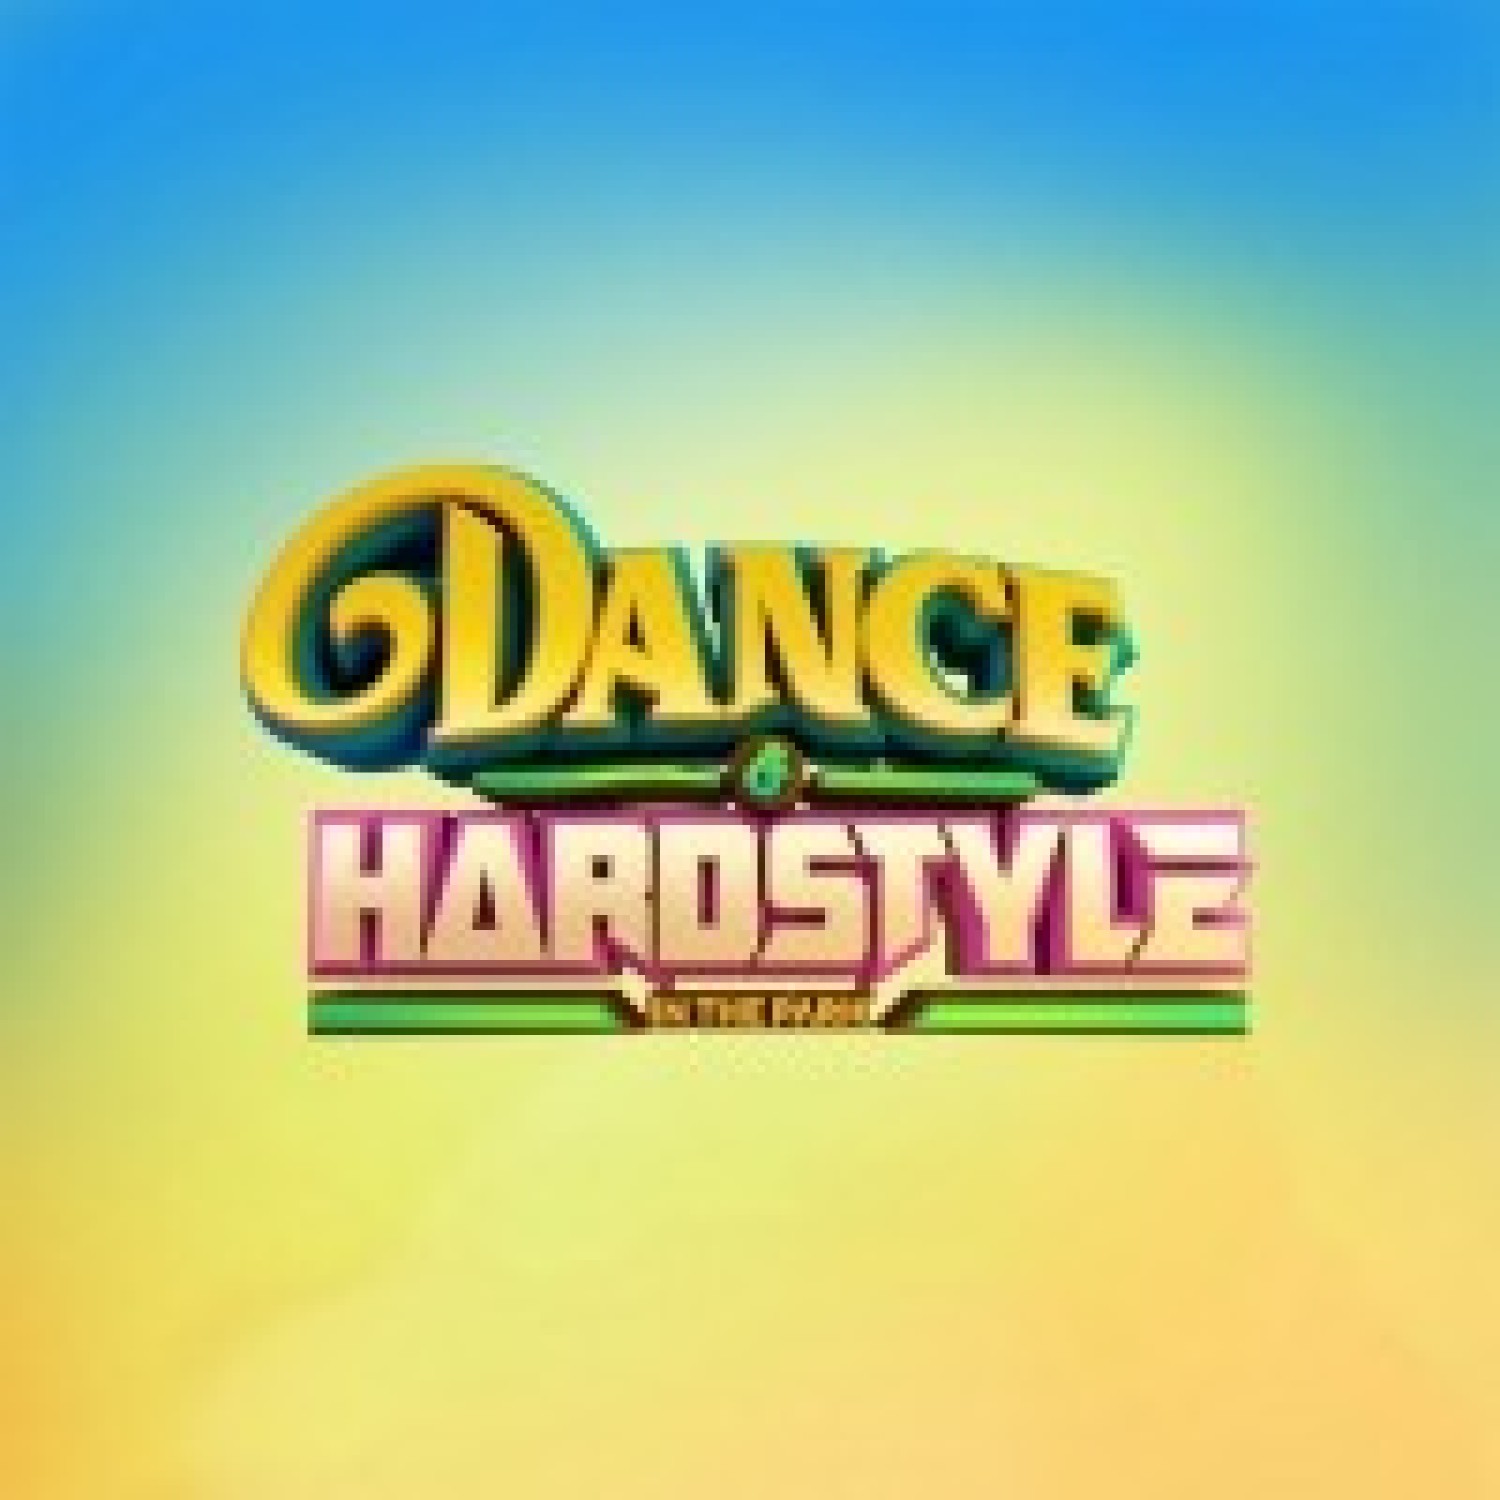 Dance & Hardstyle in the Park